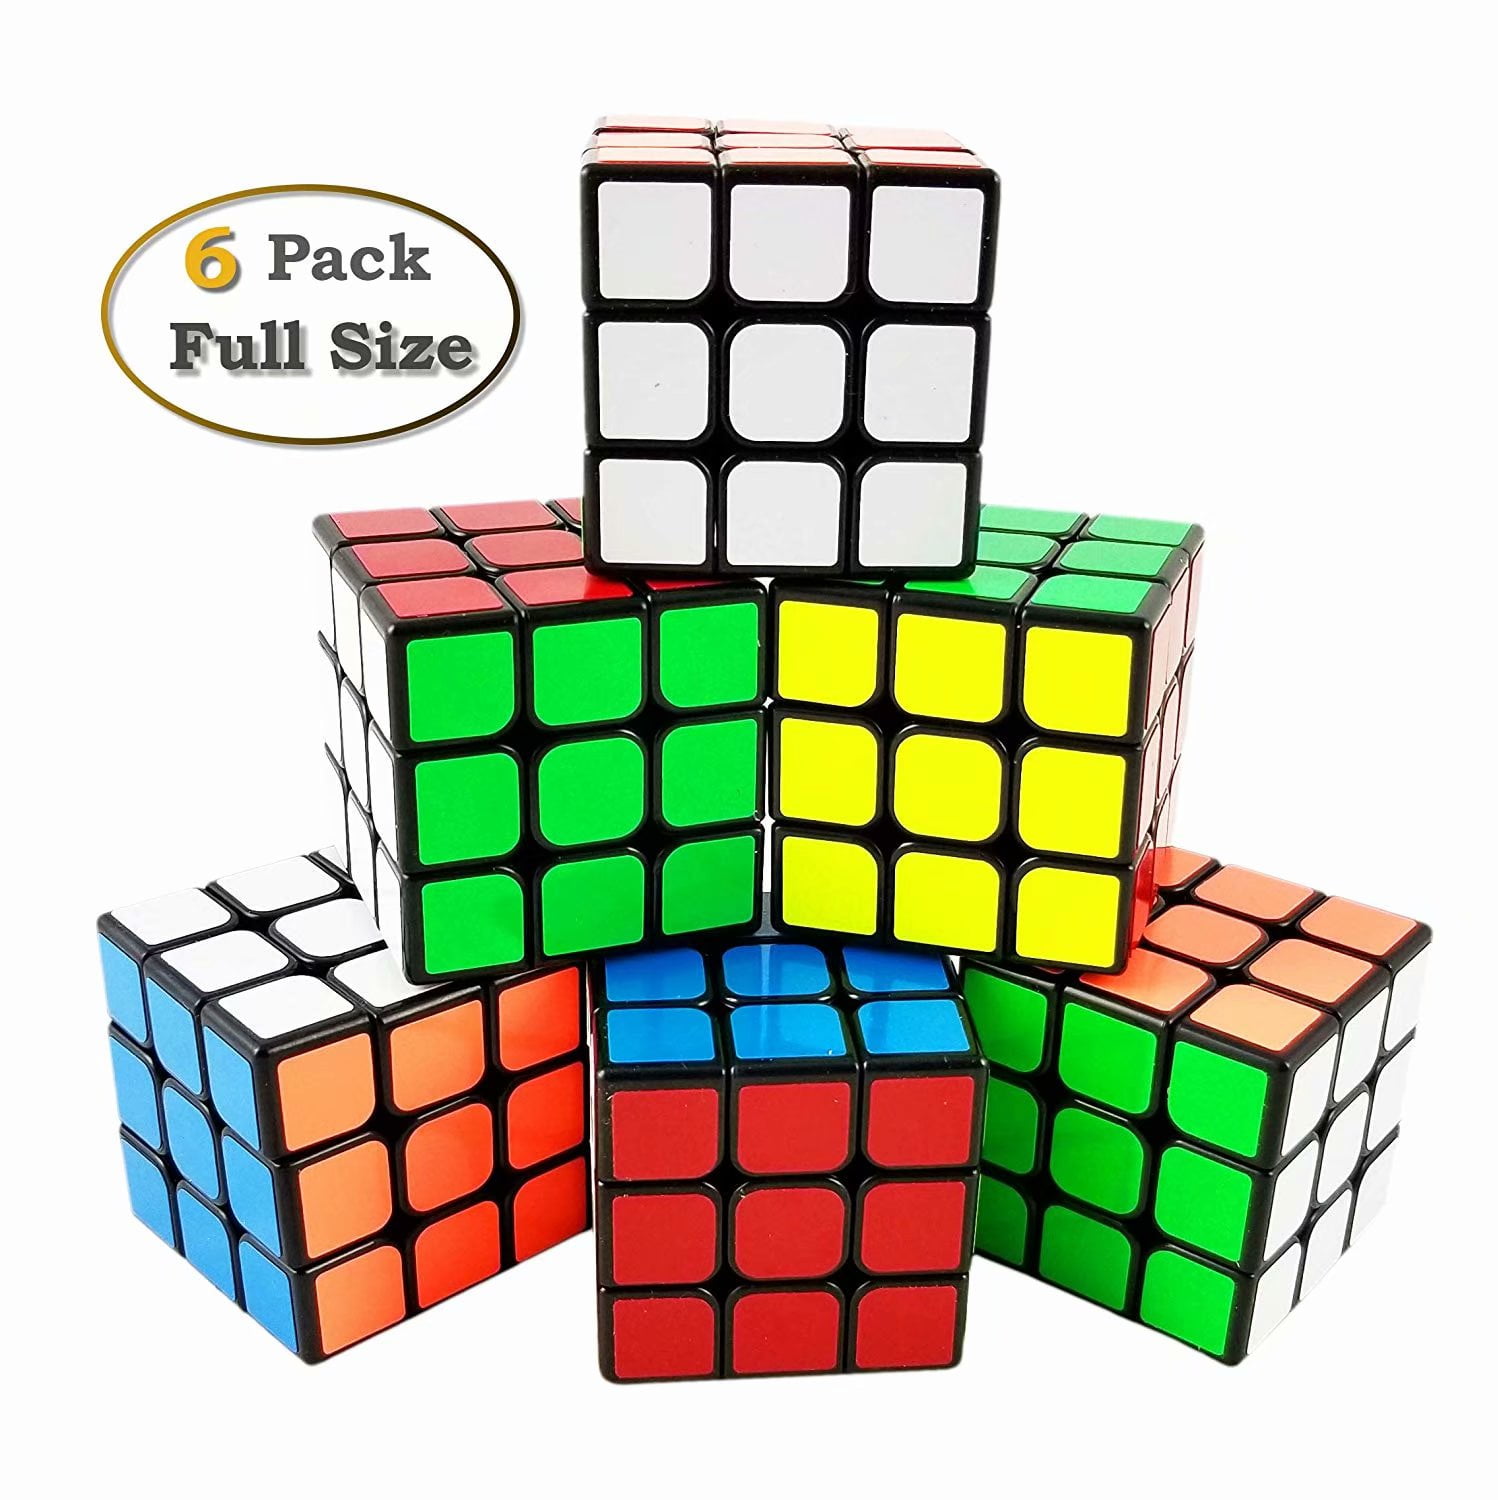 Full Size Magic Speed Cube 3x3x3 Easy Turning and Smooth Play School Supplies 